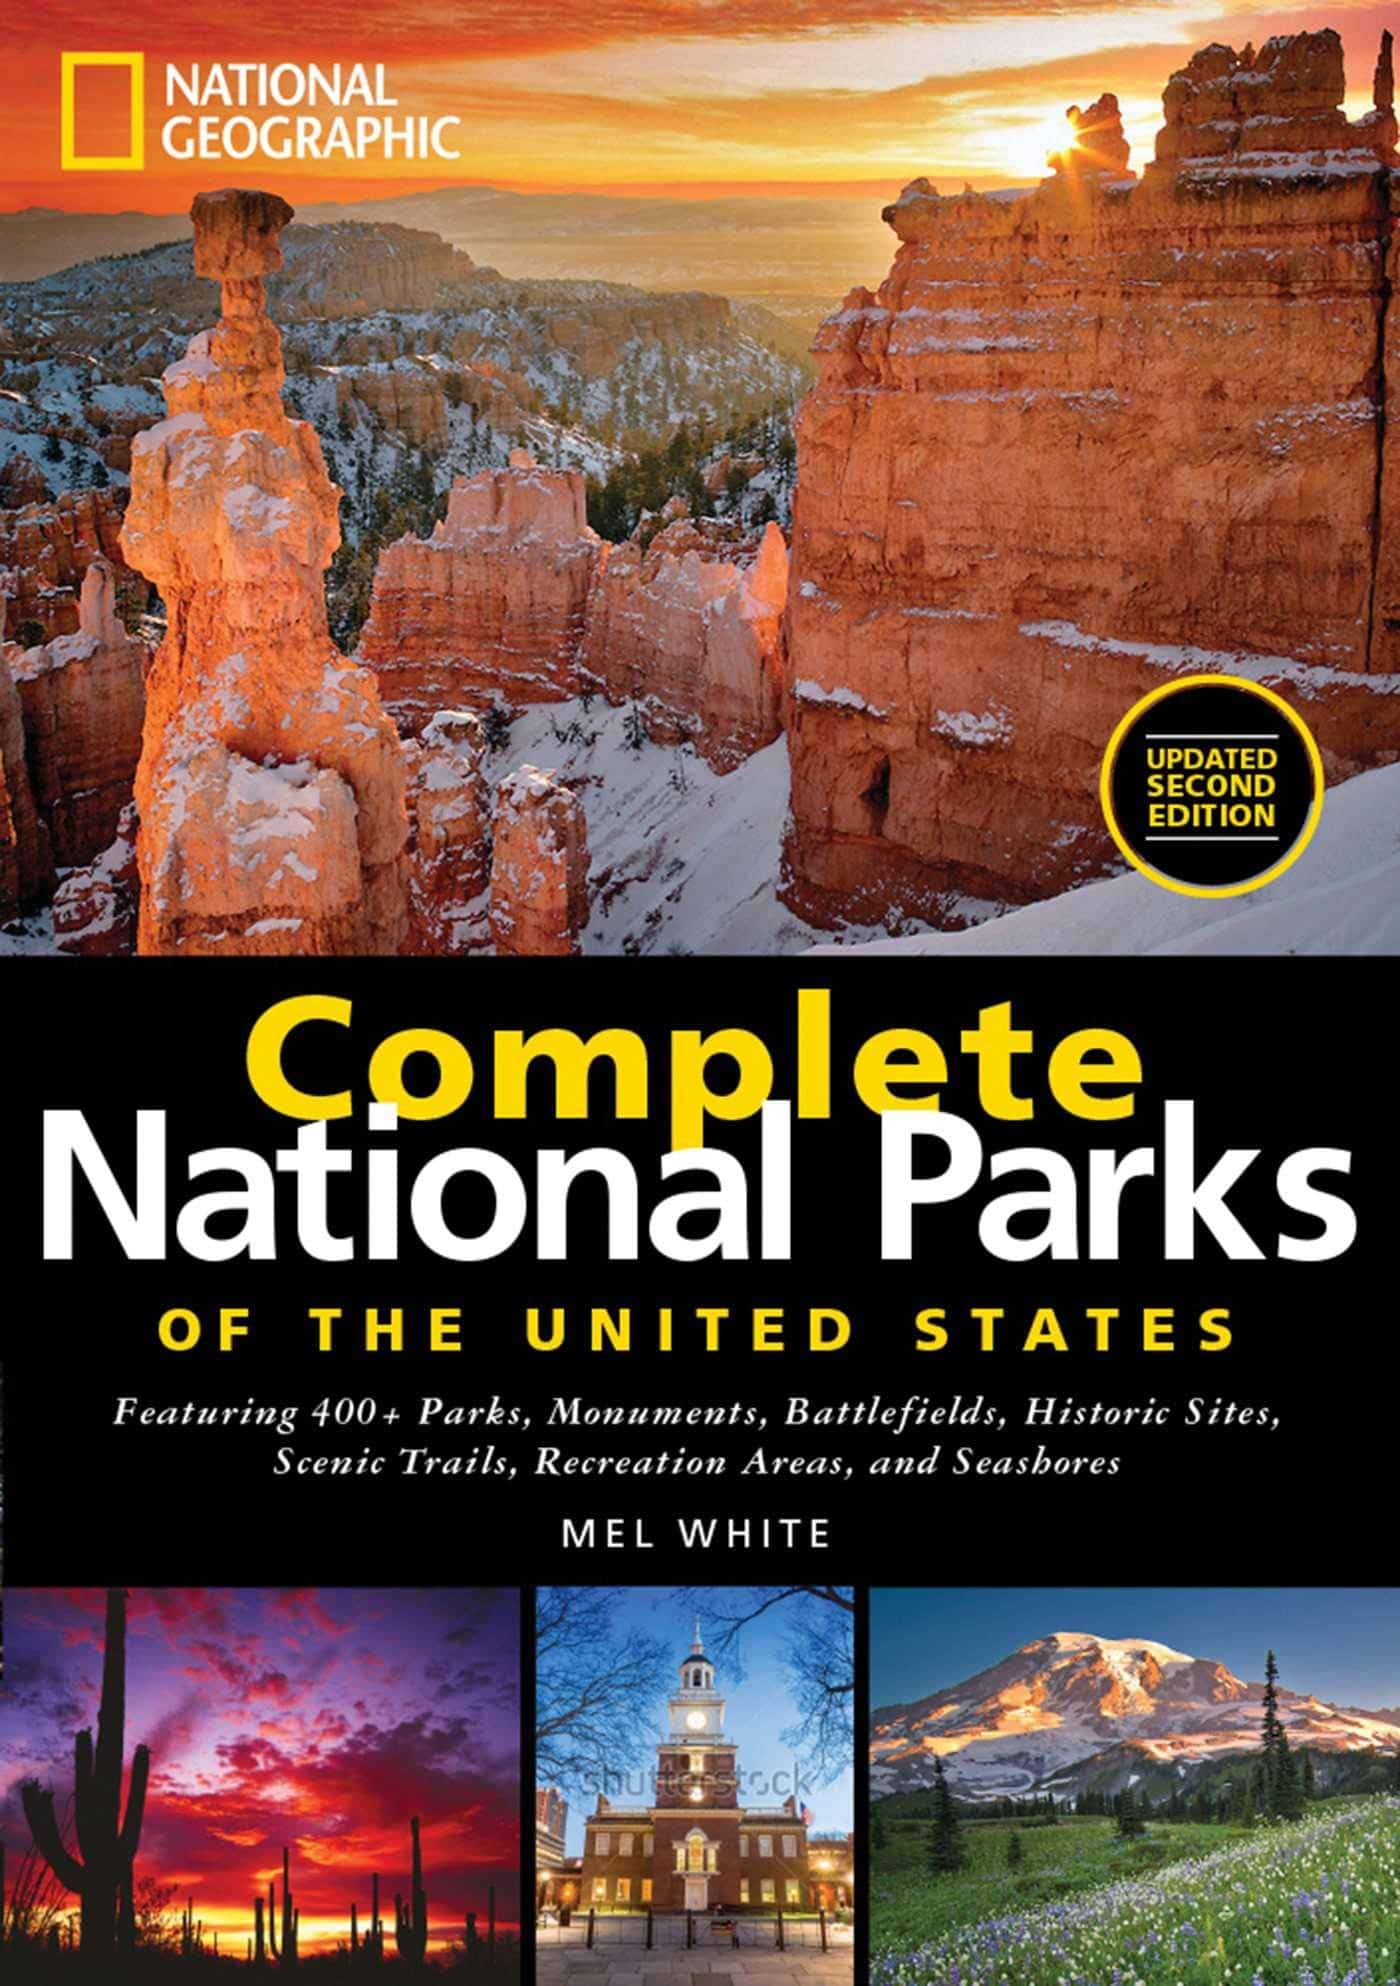 national park guide for camping and travel